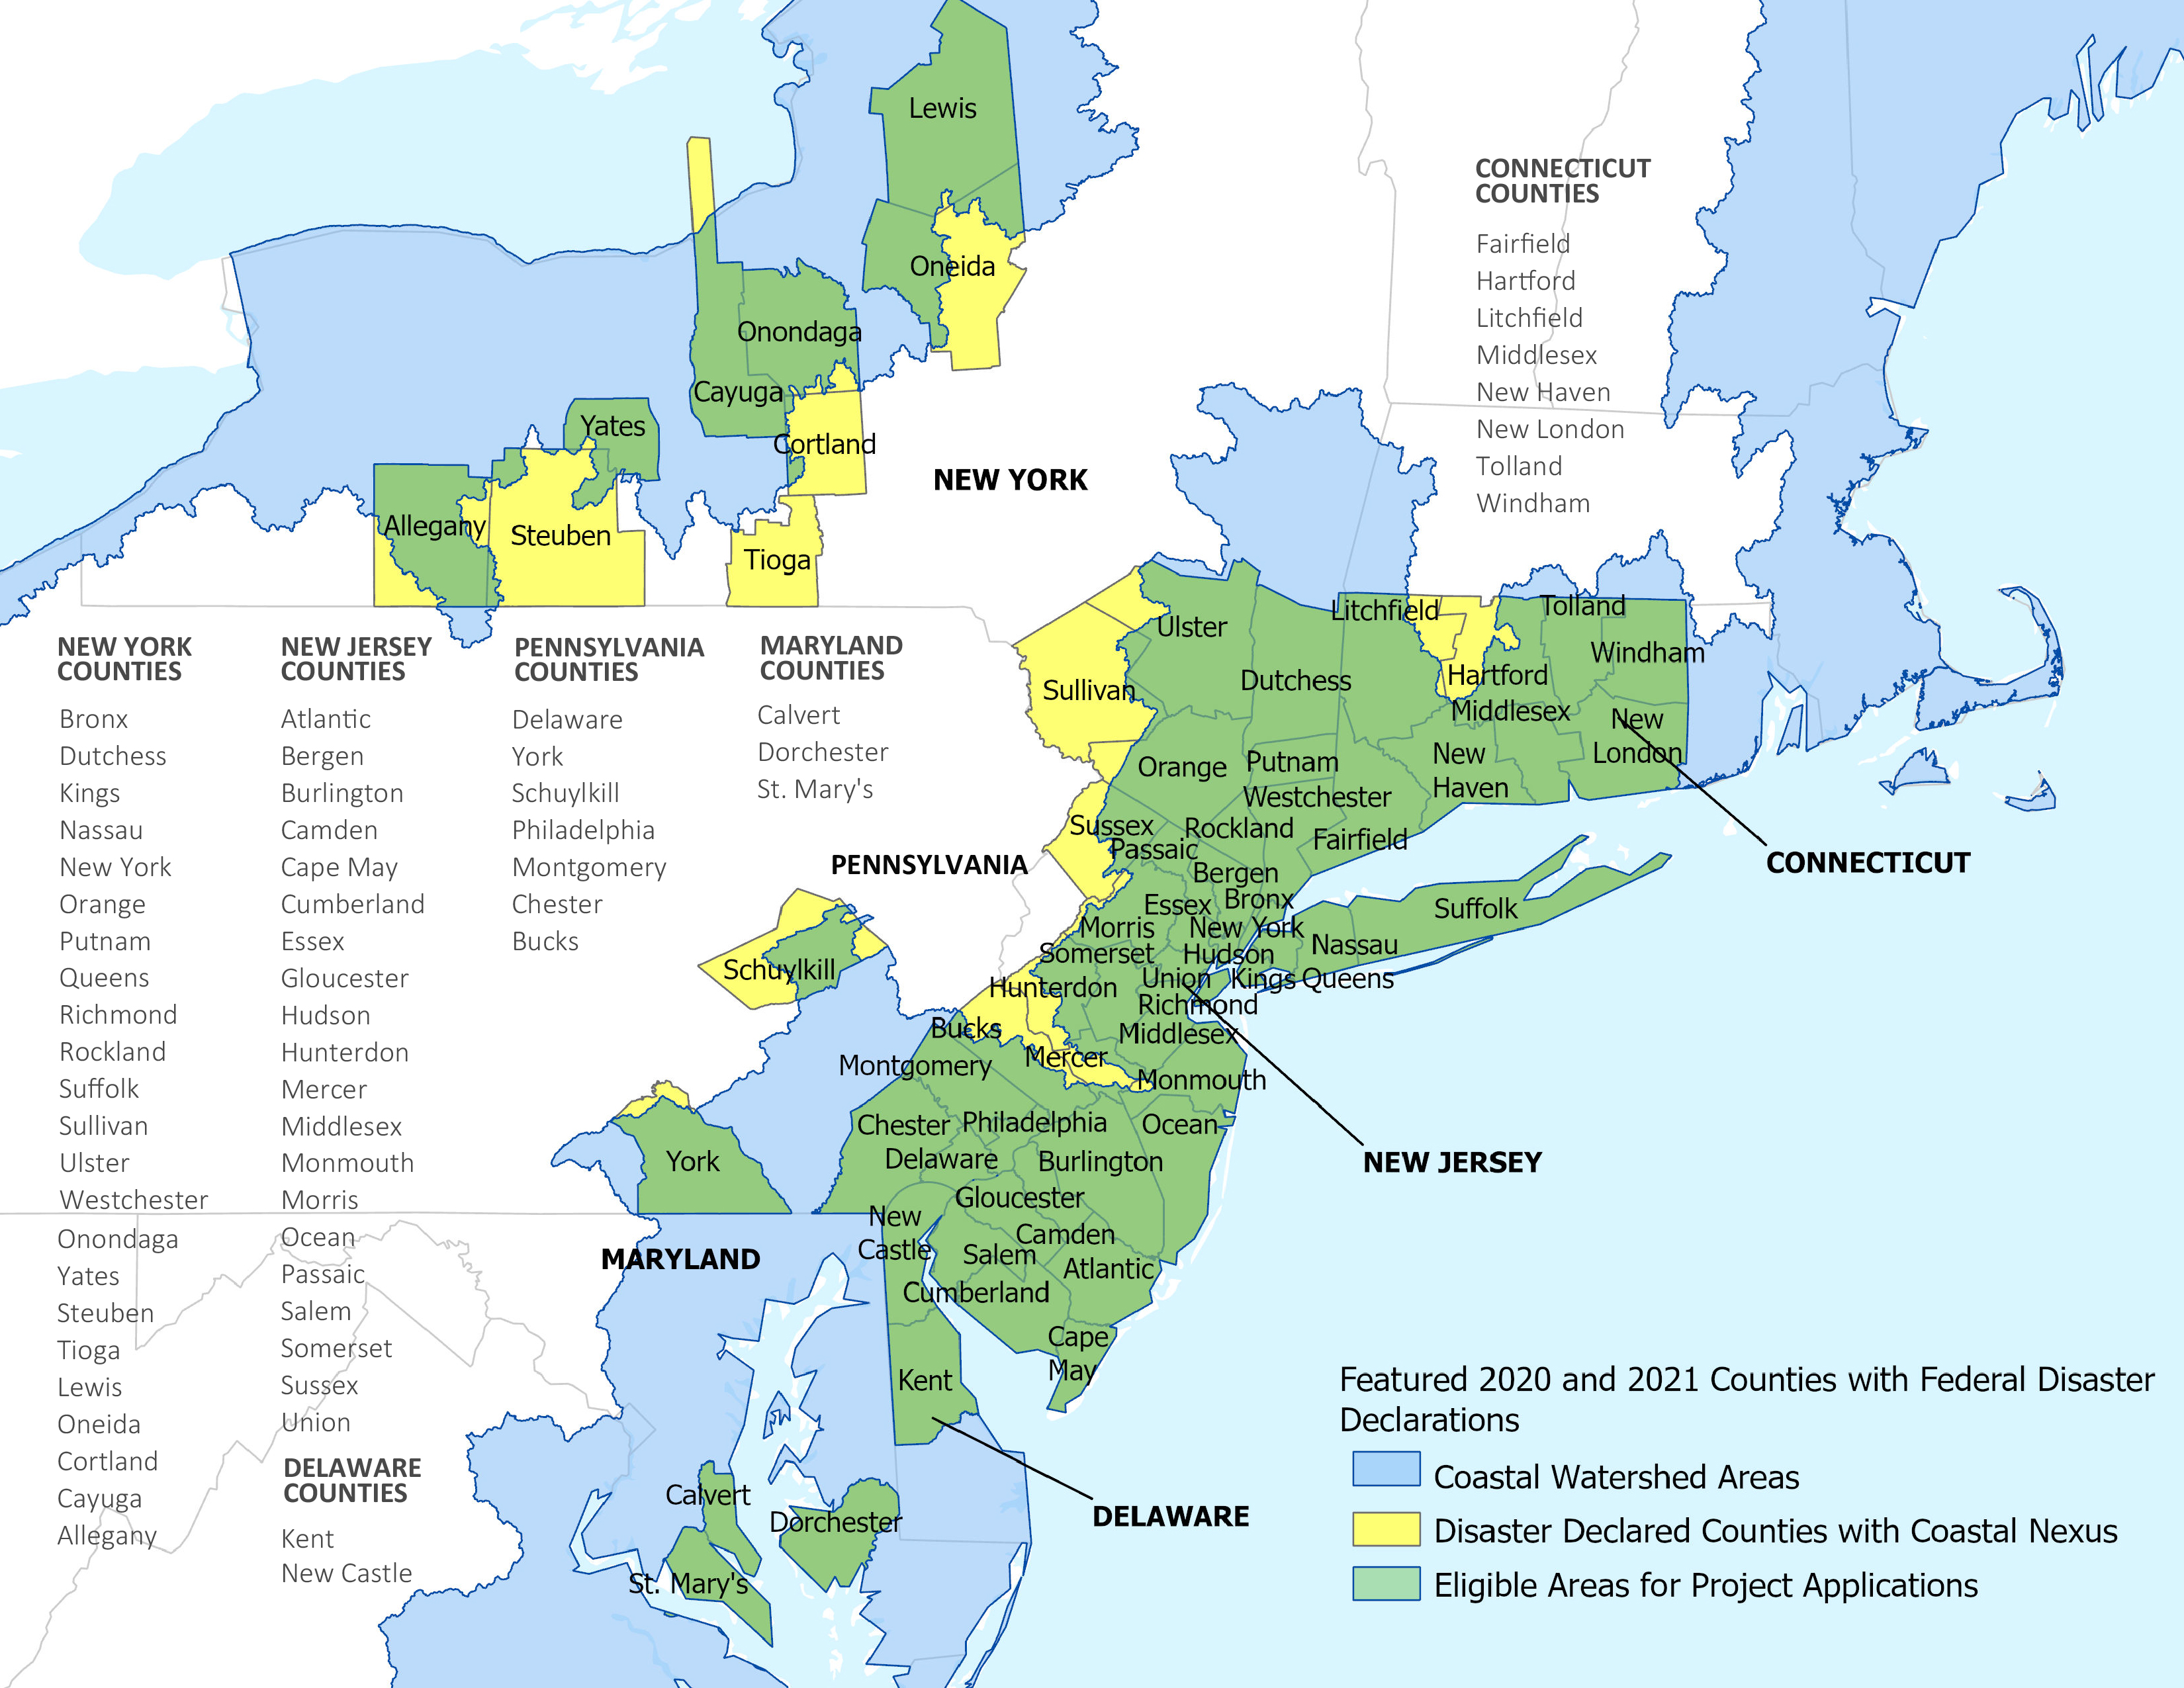 Map of the Northeast and Mid-Atlantic showing counties eligible for funding under this RFP